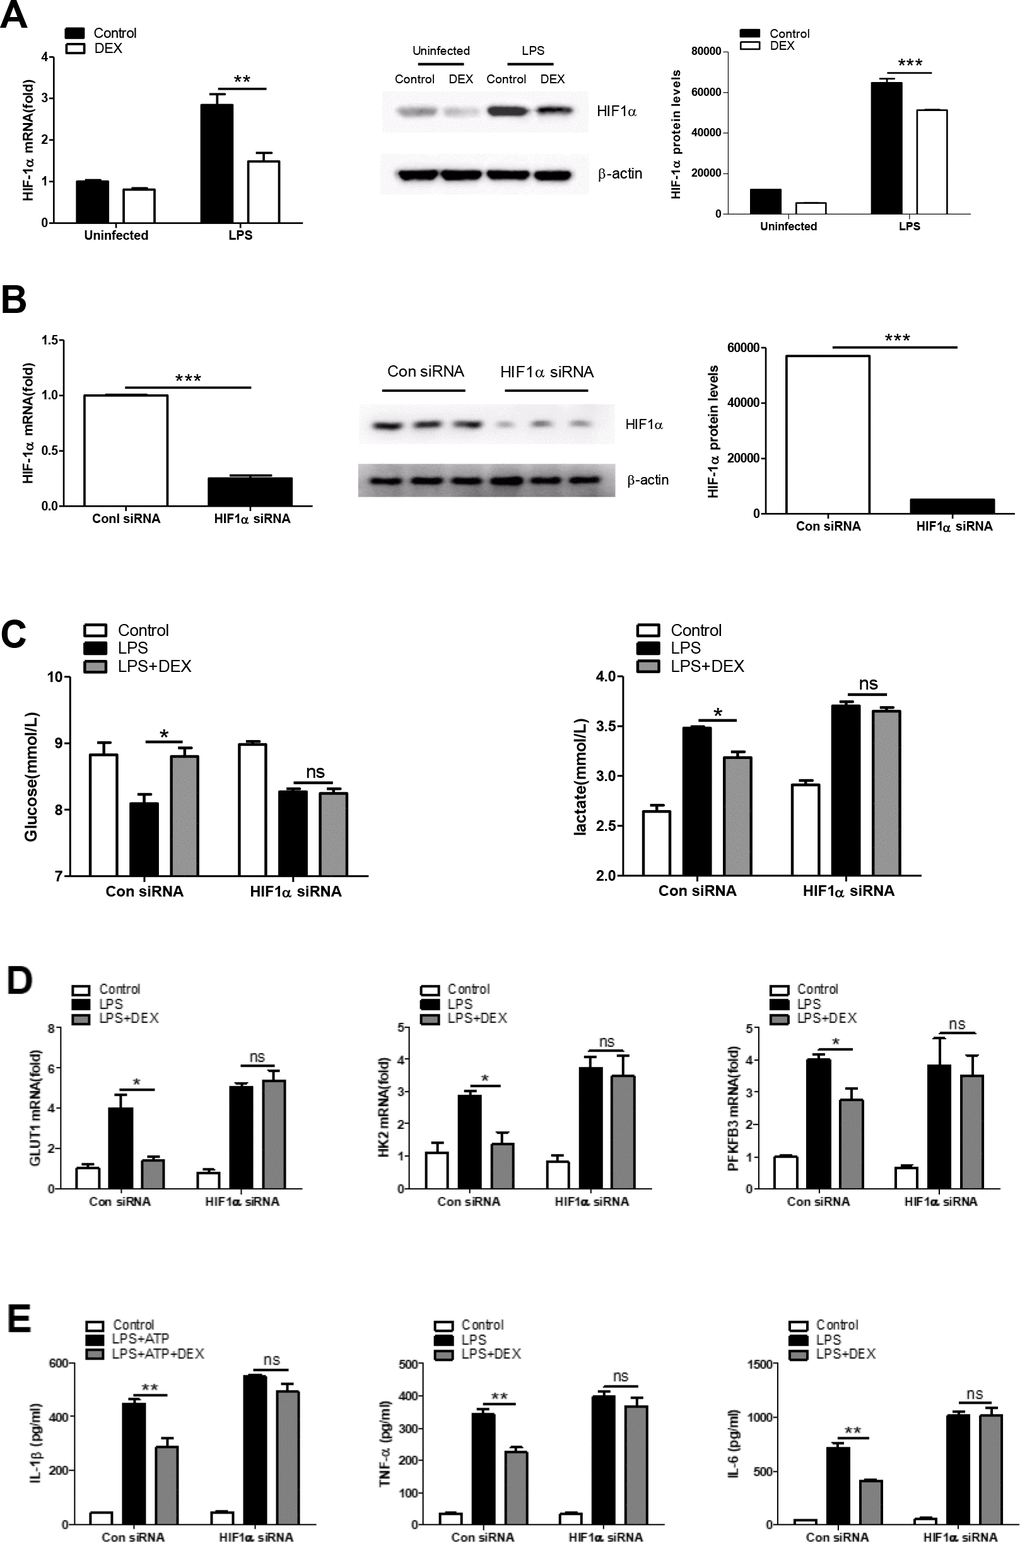 HIF1α is required for regulating the anti-inflammatory effect of DEX on LPS-treated macrophages. (A) BMDMs were treated with 100 ng/ml LPS and 1 μM DEX for 4 h. The mRNA and protein levels of HIF1α were determined by RT-PCR and Western blotting, respectively. n = 3; mean ± SEM; ** P P B) BMDMs were transfected with HIF1α siRNA or Negative control siRNA for twenty-four hours. The mRNA and protein levels of HIF1α were determined by real-time PCR and Western blotting, respectively. n = 3; mean ± SEM; *** P C) BMDMs were transfected as in (B). Twenty-four hours after transfection, the cells were treated with 100 ng/ml LPS and 1 μM DEX for 4 h. Supernatants were collected, and the levels of glucose and lactate were measured. n = 3; mean ± SEM; * P D) BMDMs were transfected as in (B). Twenty-four hours after transfection, the cells were treated with 100 ng/ml LPS and 1 μM DEX for 4 h. The mRNA levels of GLUT1, HK2 and PFKFB3 were determined by RT-PCR. n = 3; mean ± SEM; * P E) BMDMs were transfected as in (B). Twenty-four hours after transfection, the cells were treated with 100 ng/ml LPS and/or 5 mM ATP and 1 μM DEX for 4 h. Levels of IL-1β, TNF-α and IL-6 were determined by ELISA. n = 3; mean ± SD; ** P 